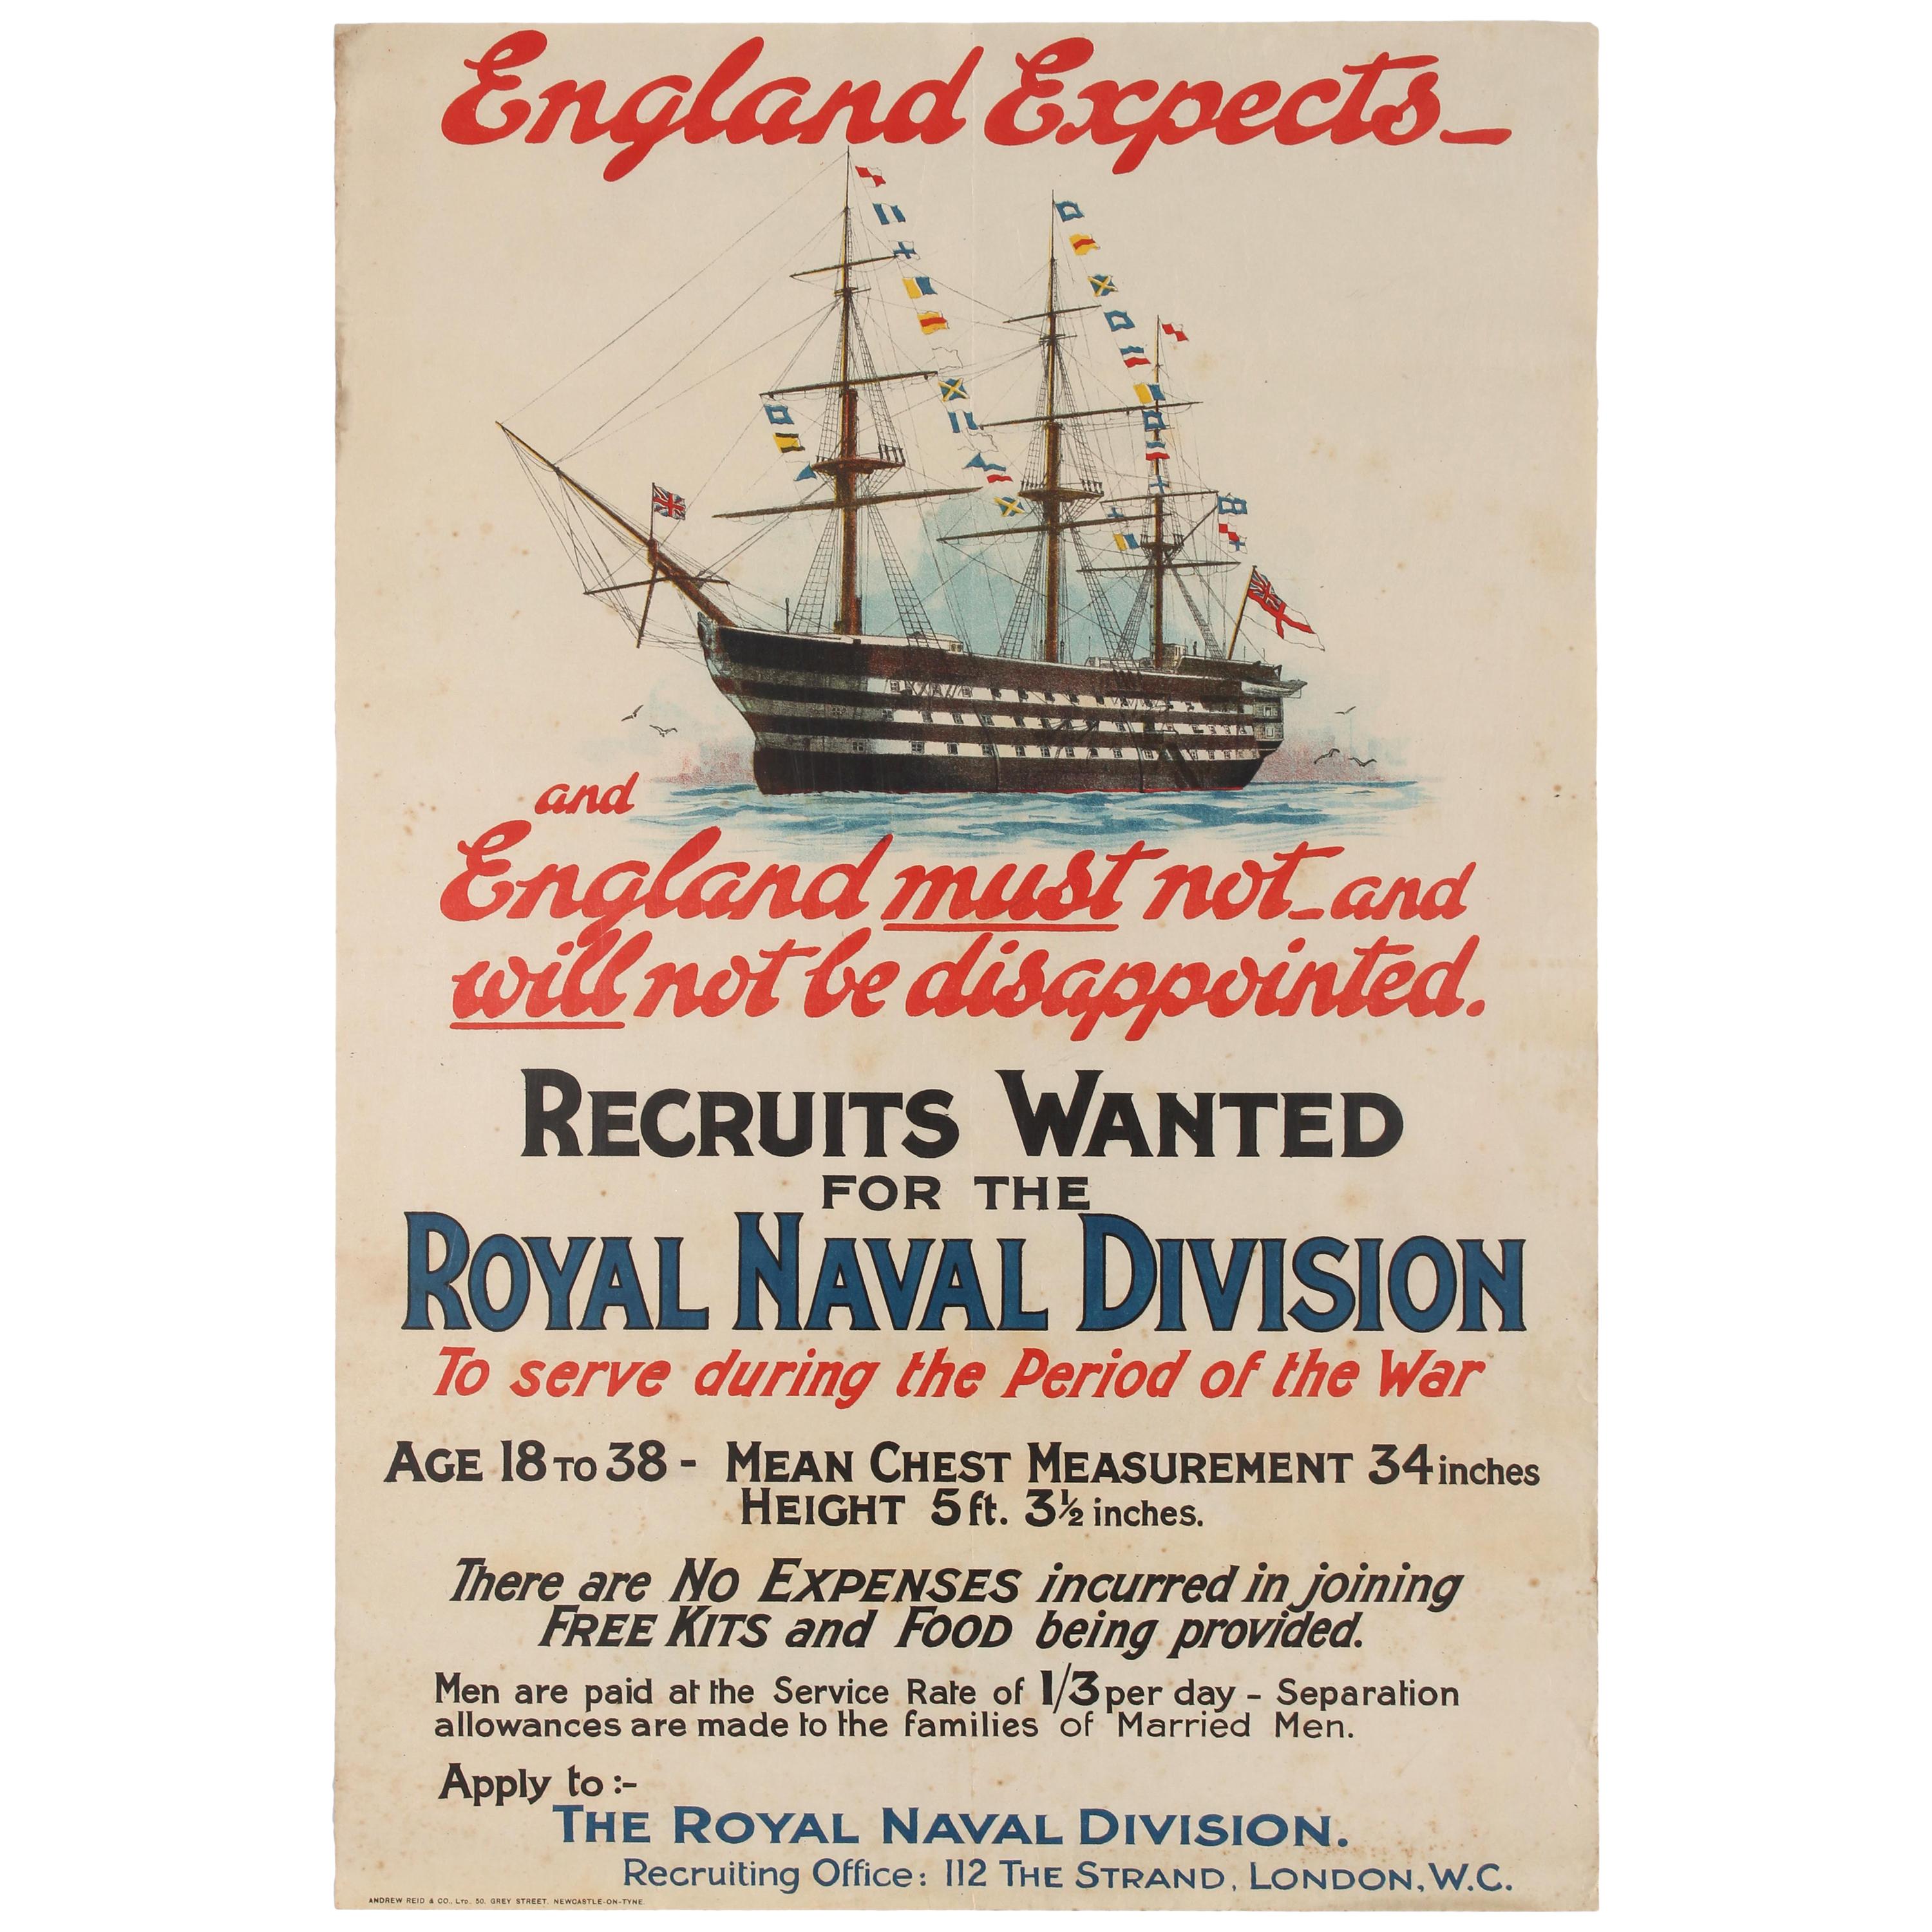 Original Antique WWI Royal Navy Recruitment Poster England Expects HMS Victory